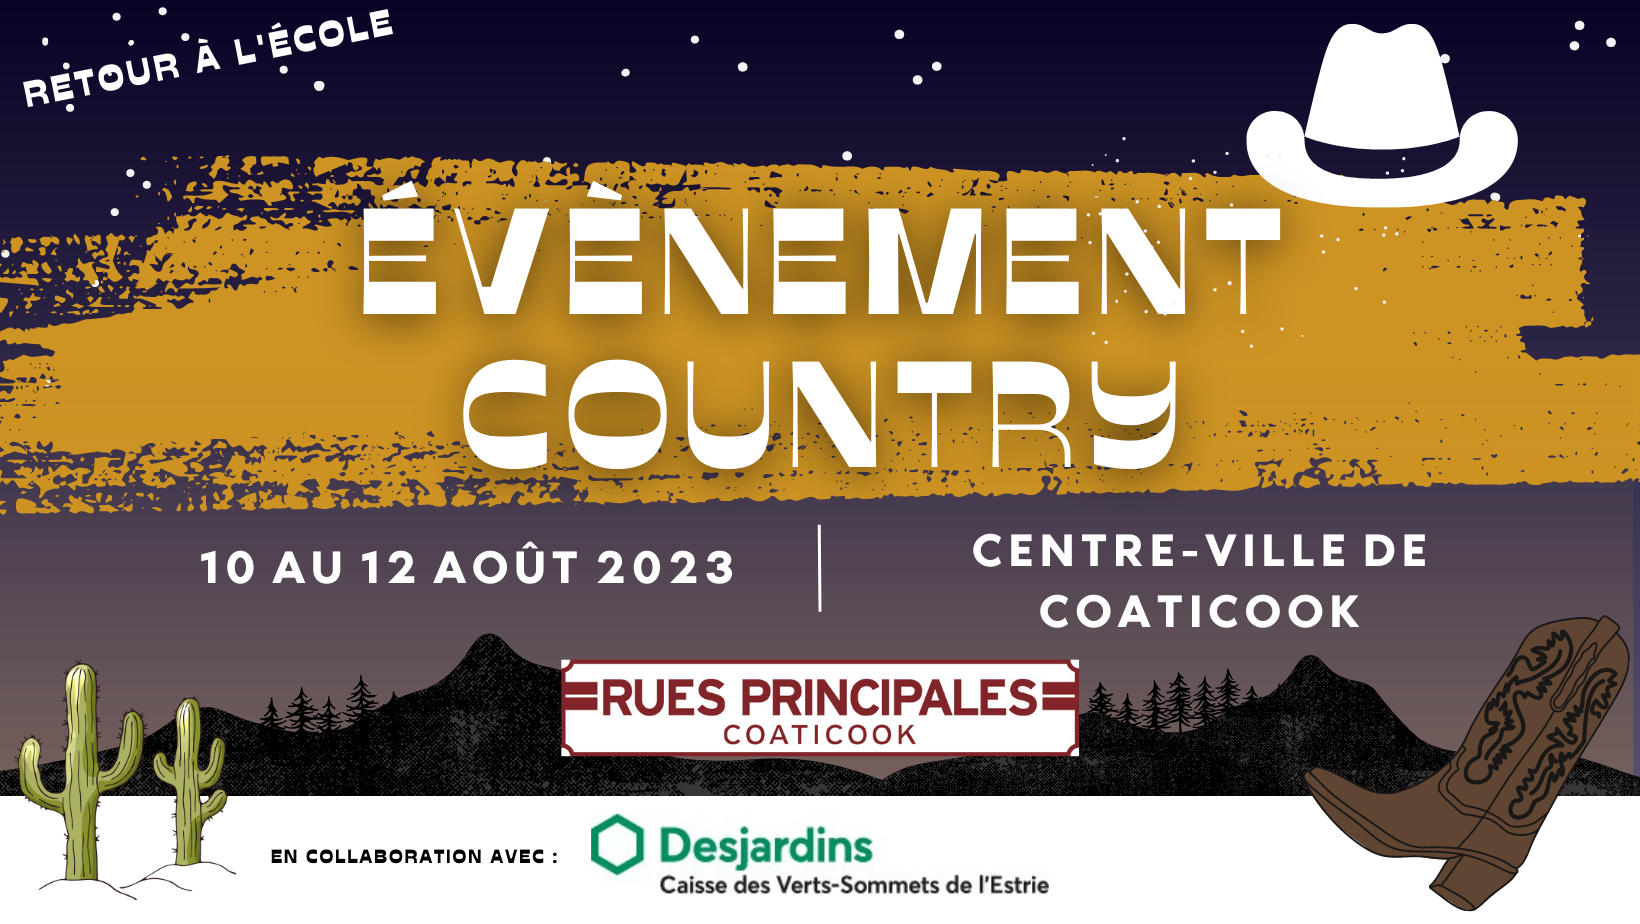 Evenement Country